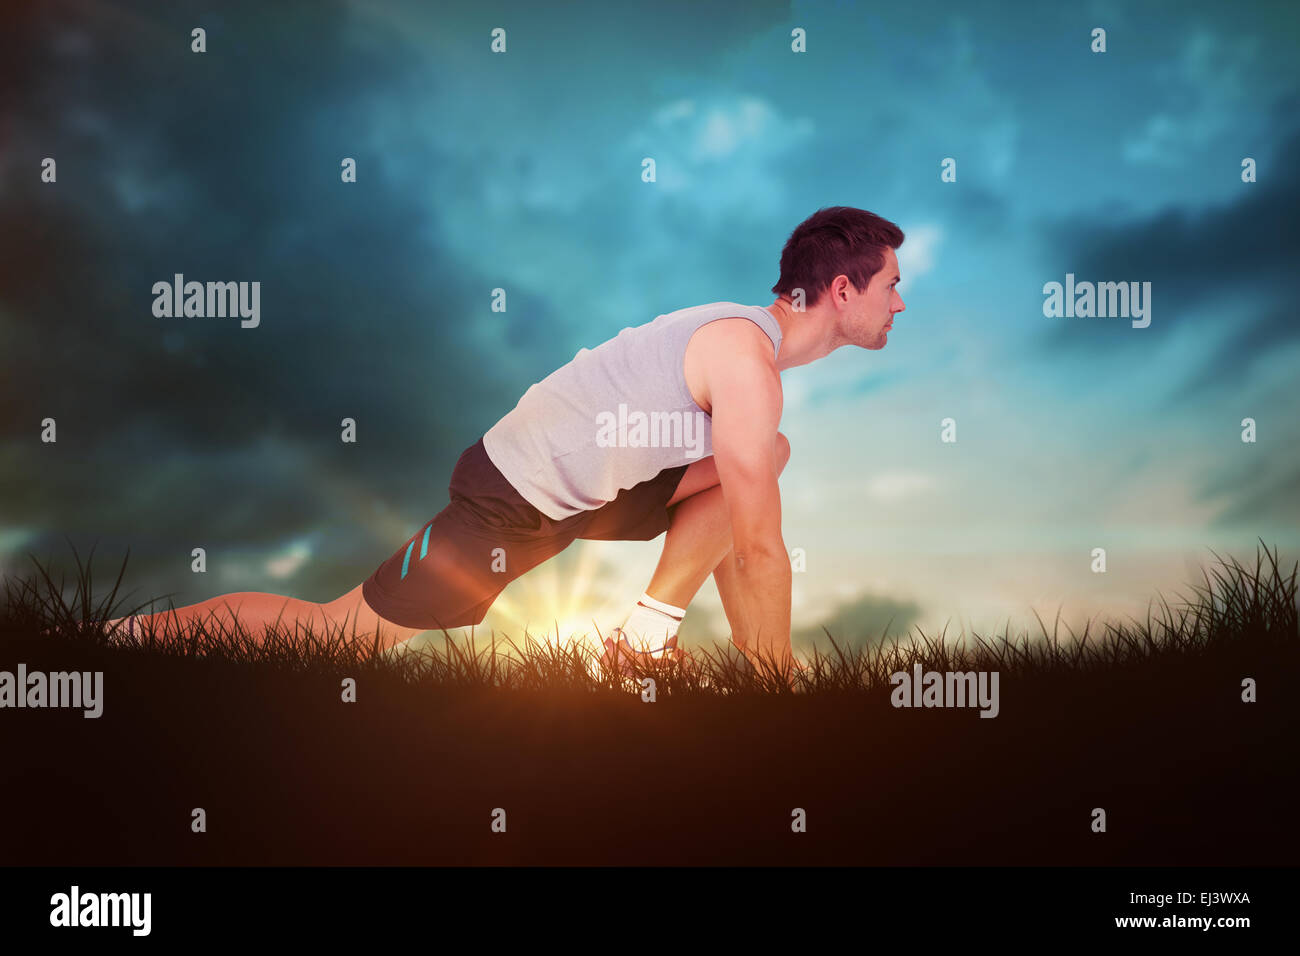 Composite image of side view of a young man in ready to run posture Stock Photo